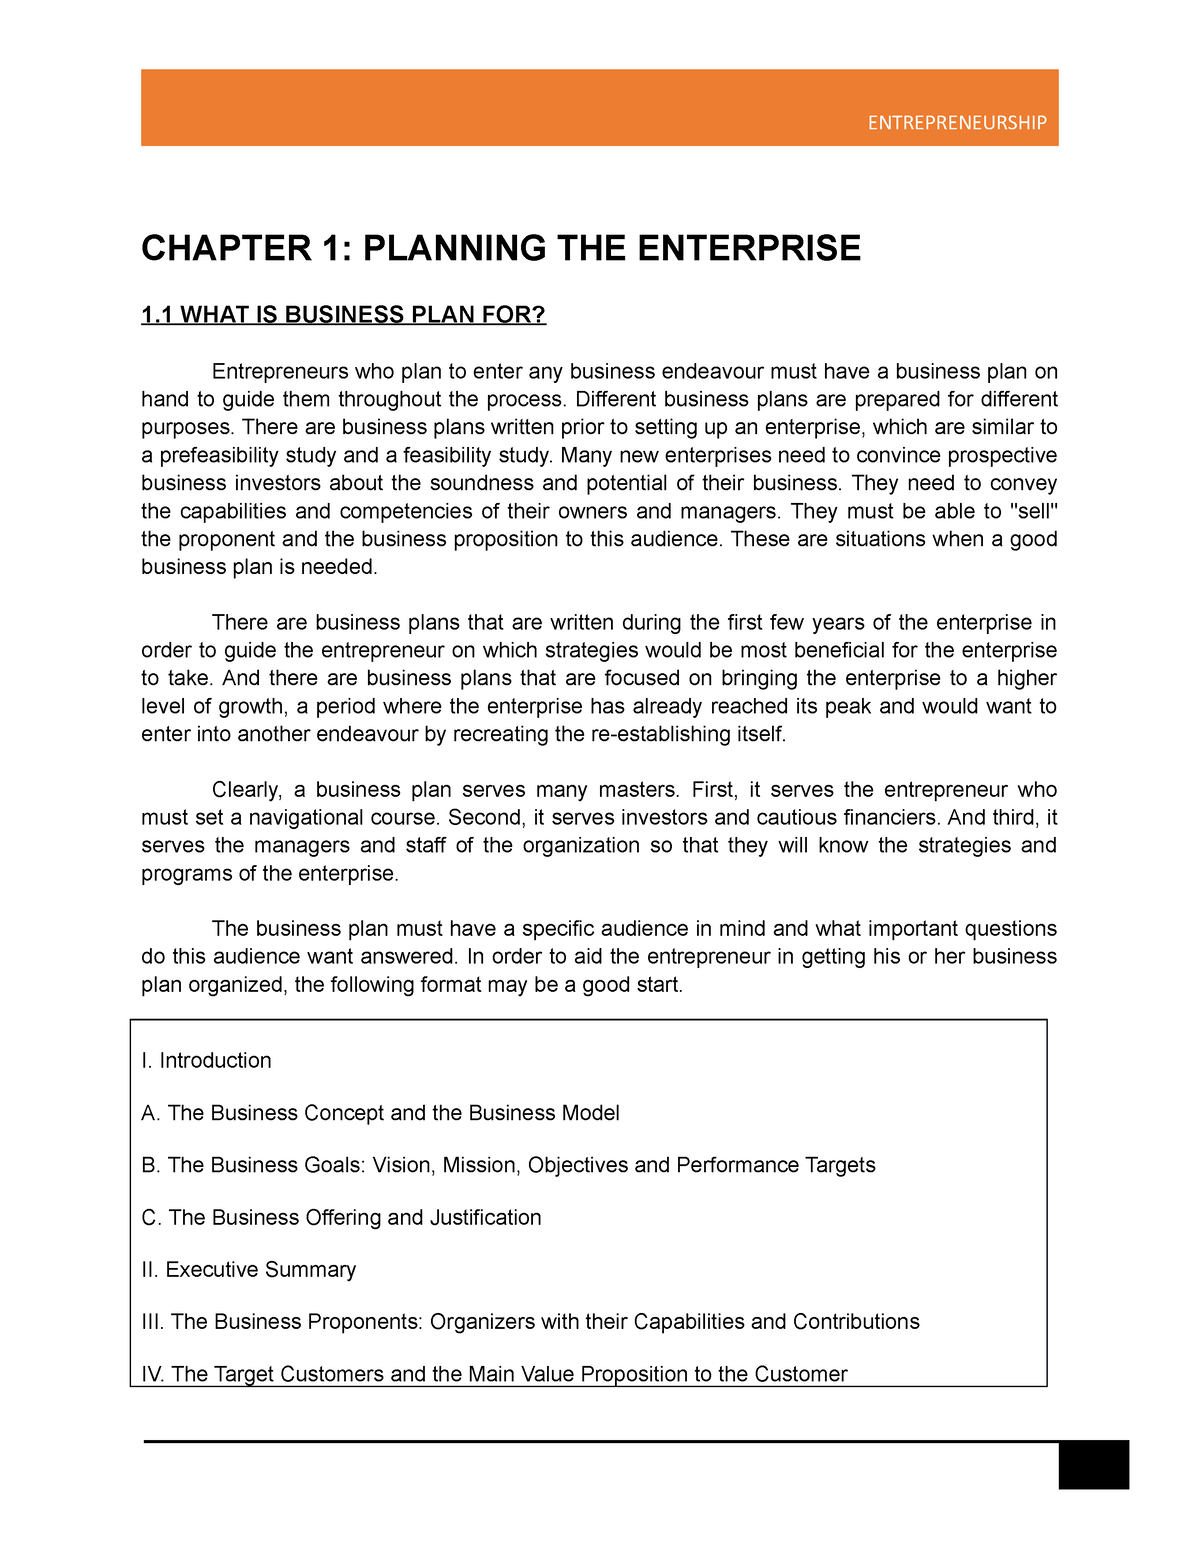 business plan chapter 1 and 2